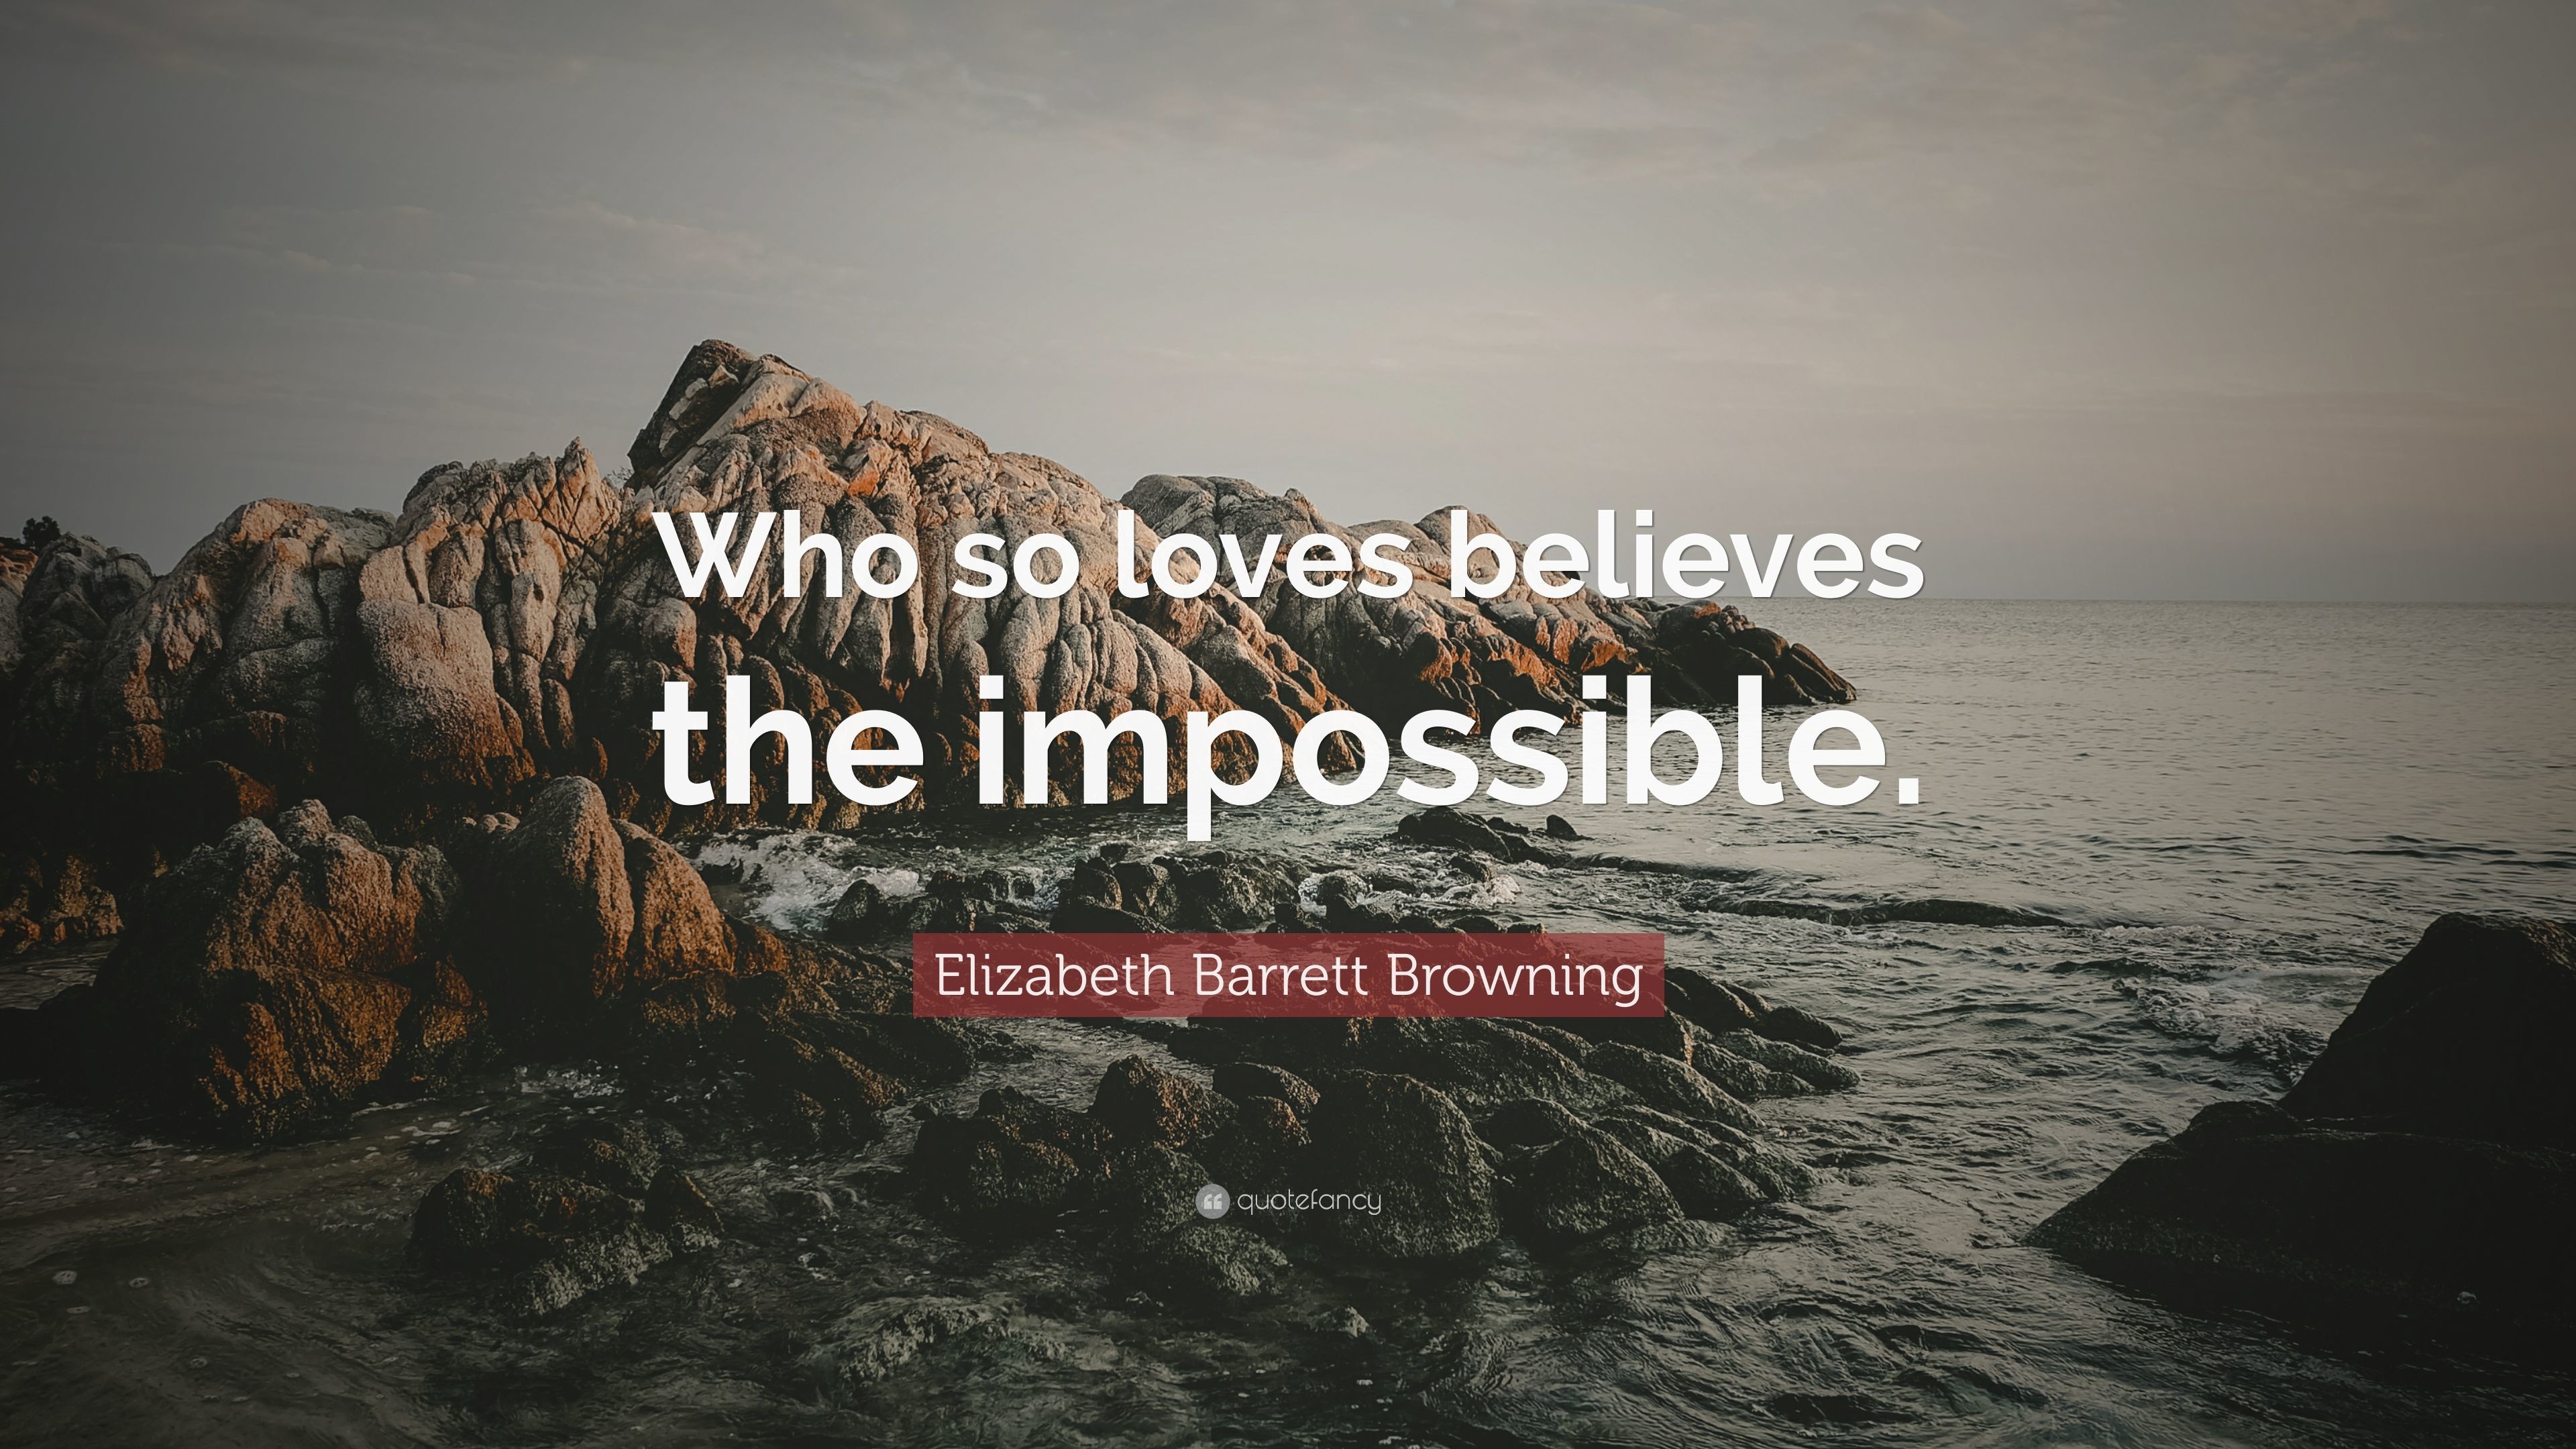 3840x2160 Elizabeth Barrett Browning Quote: “Who so loves believes the impossible.”